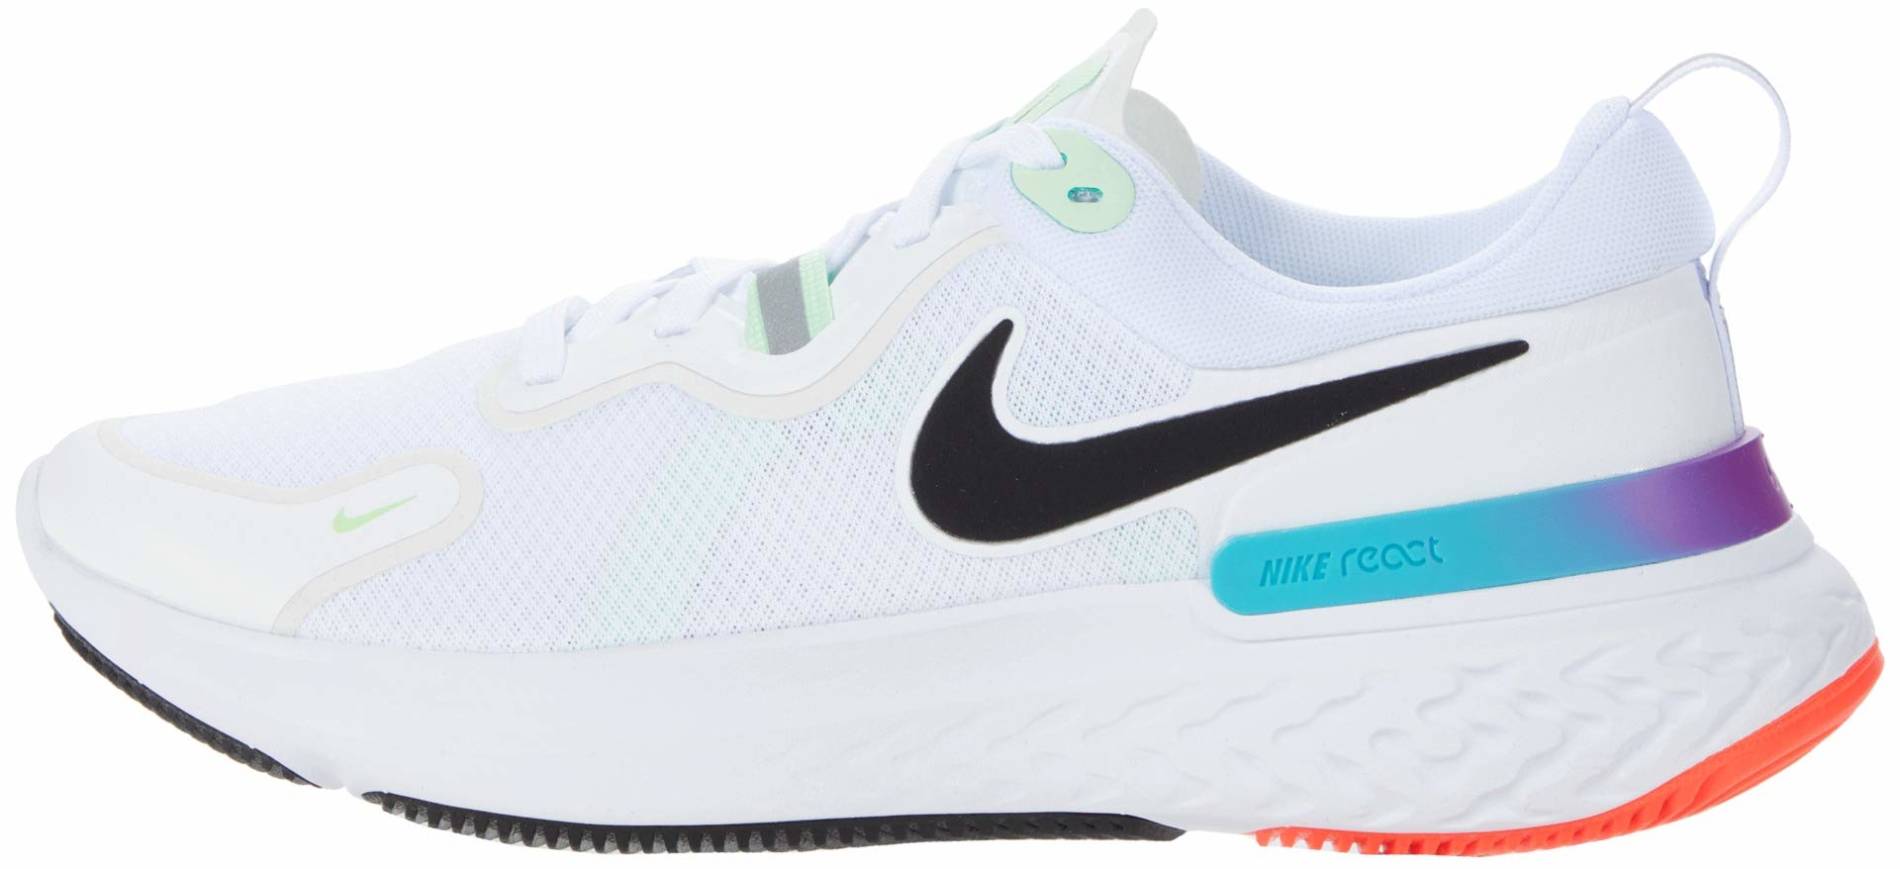 Save 50% on Nike Neutral Running Shoes 